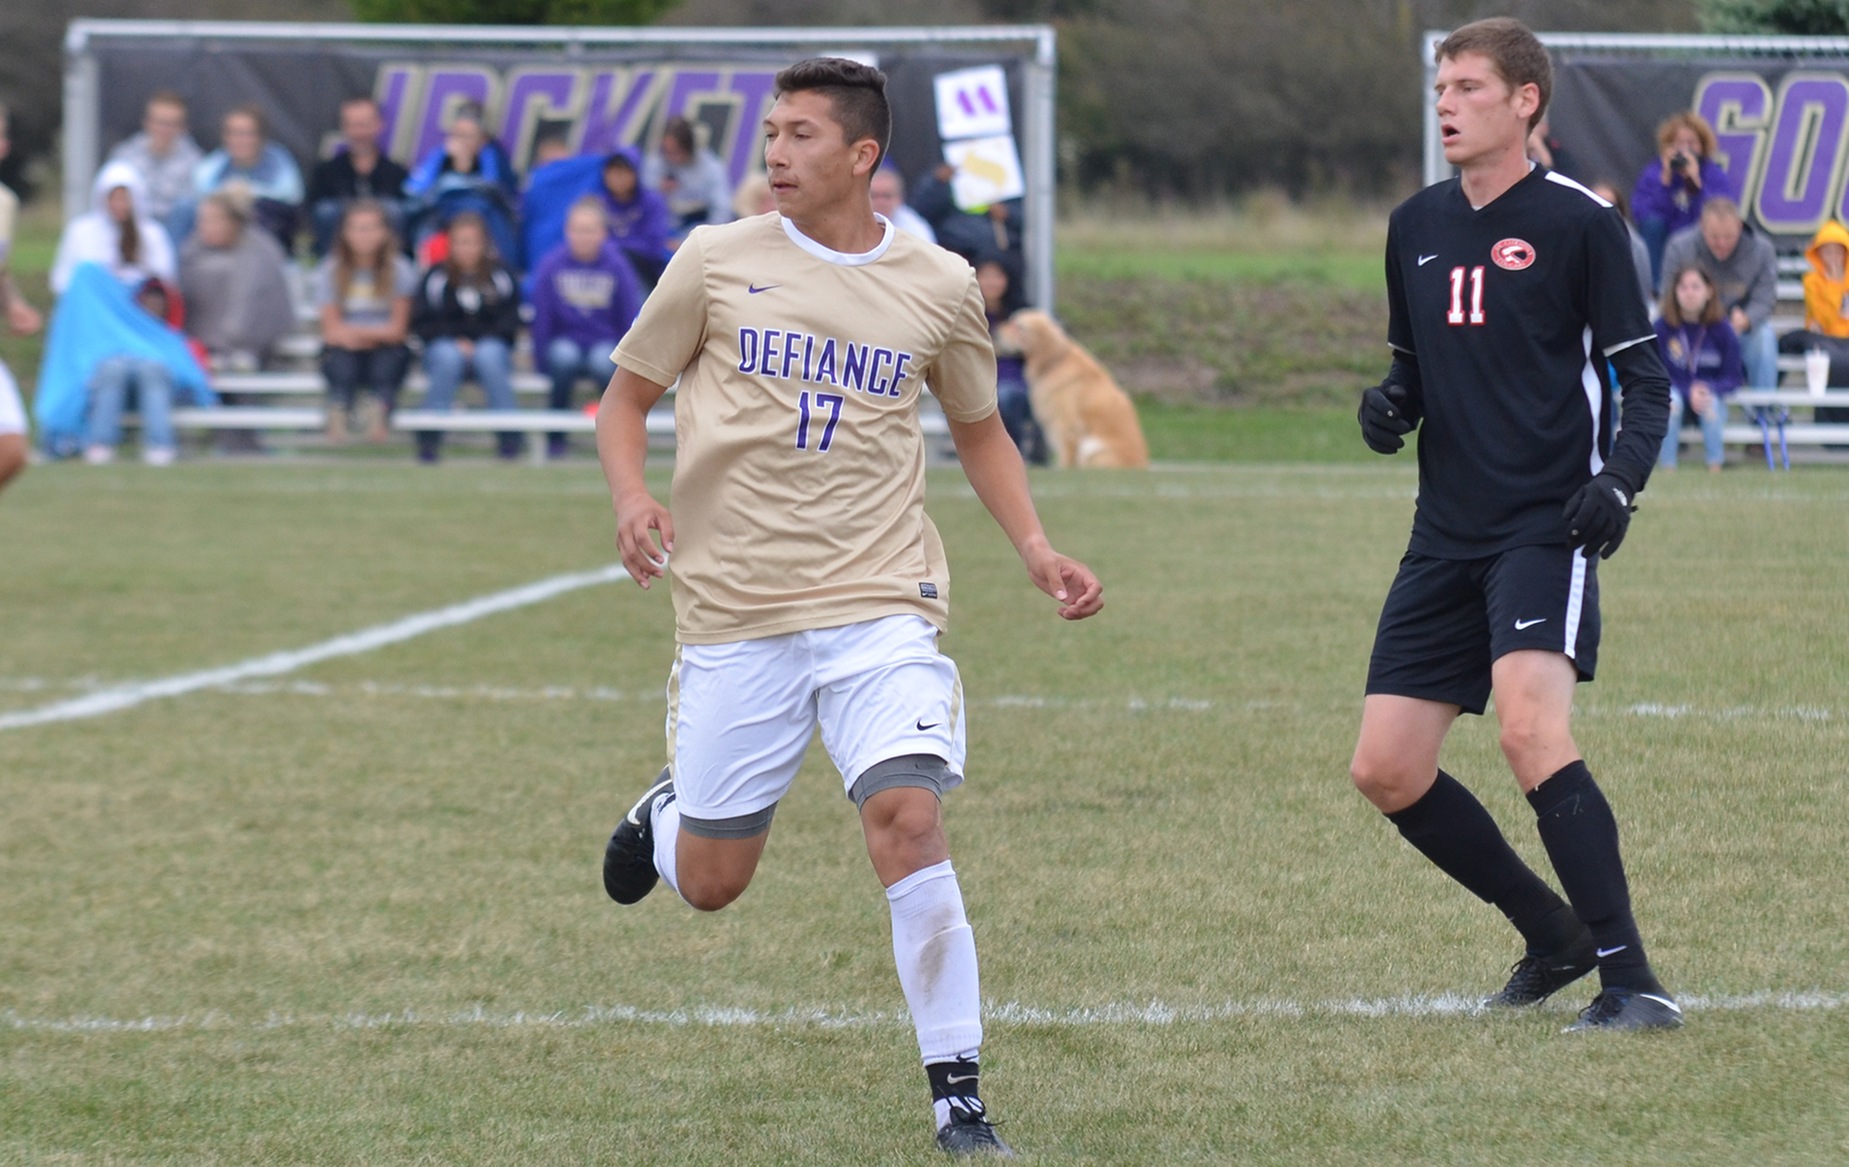 Defiance Earns 4-0 Victory on Second Day of Road Trip